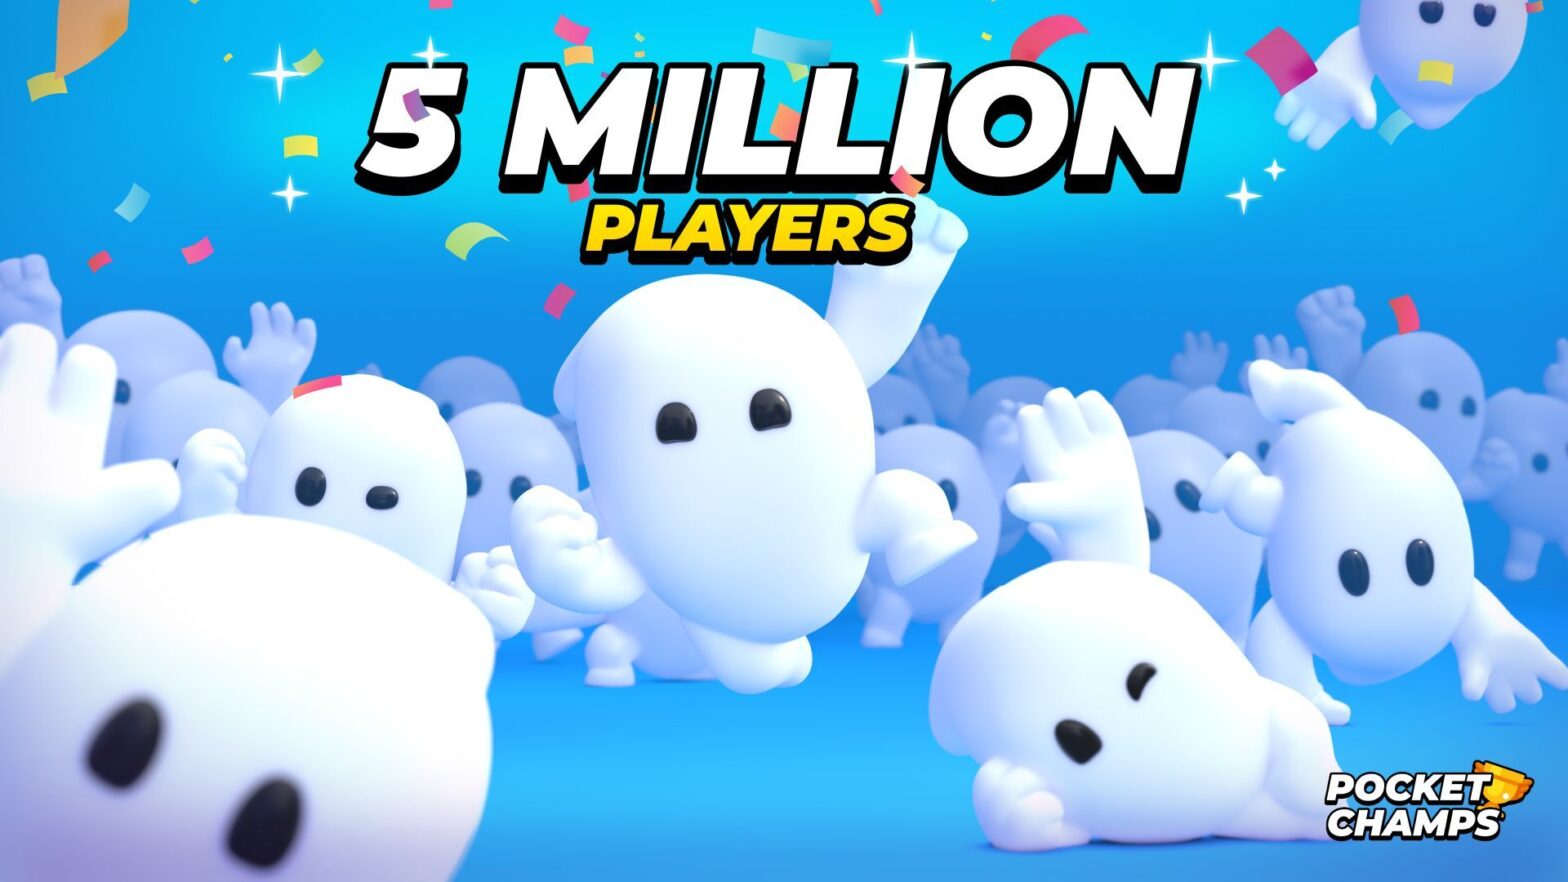 Pocket Champs has exceeded 5 million downloads